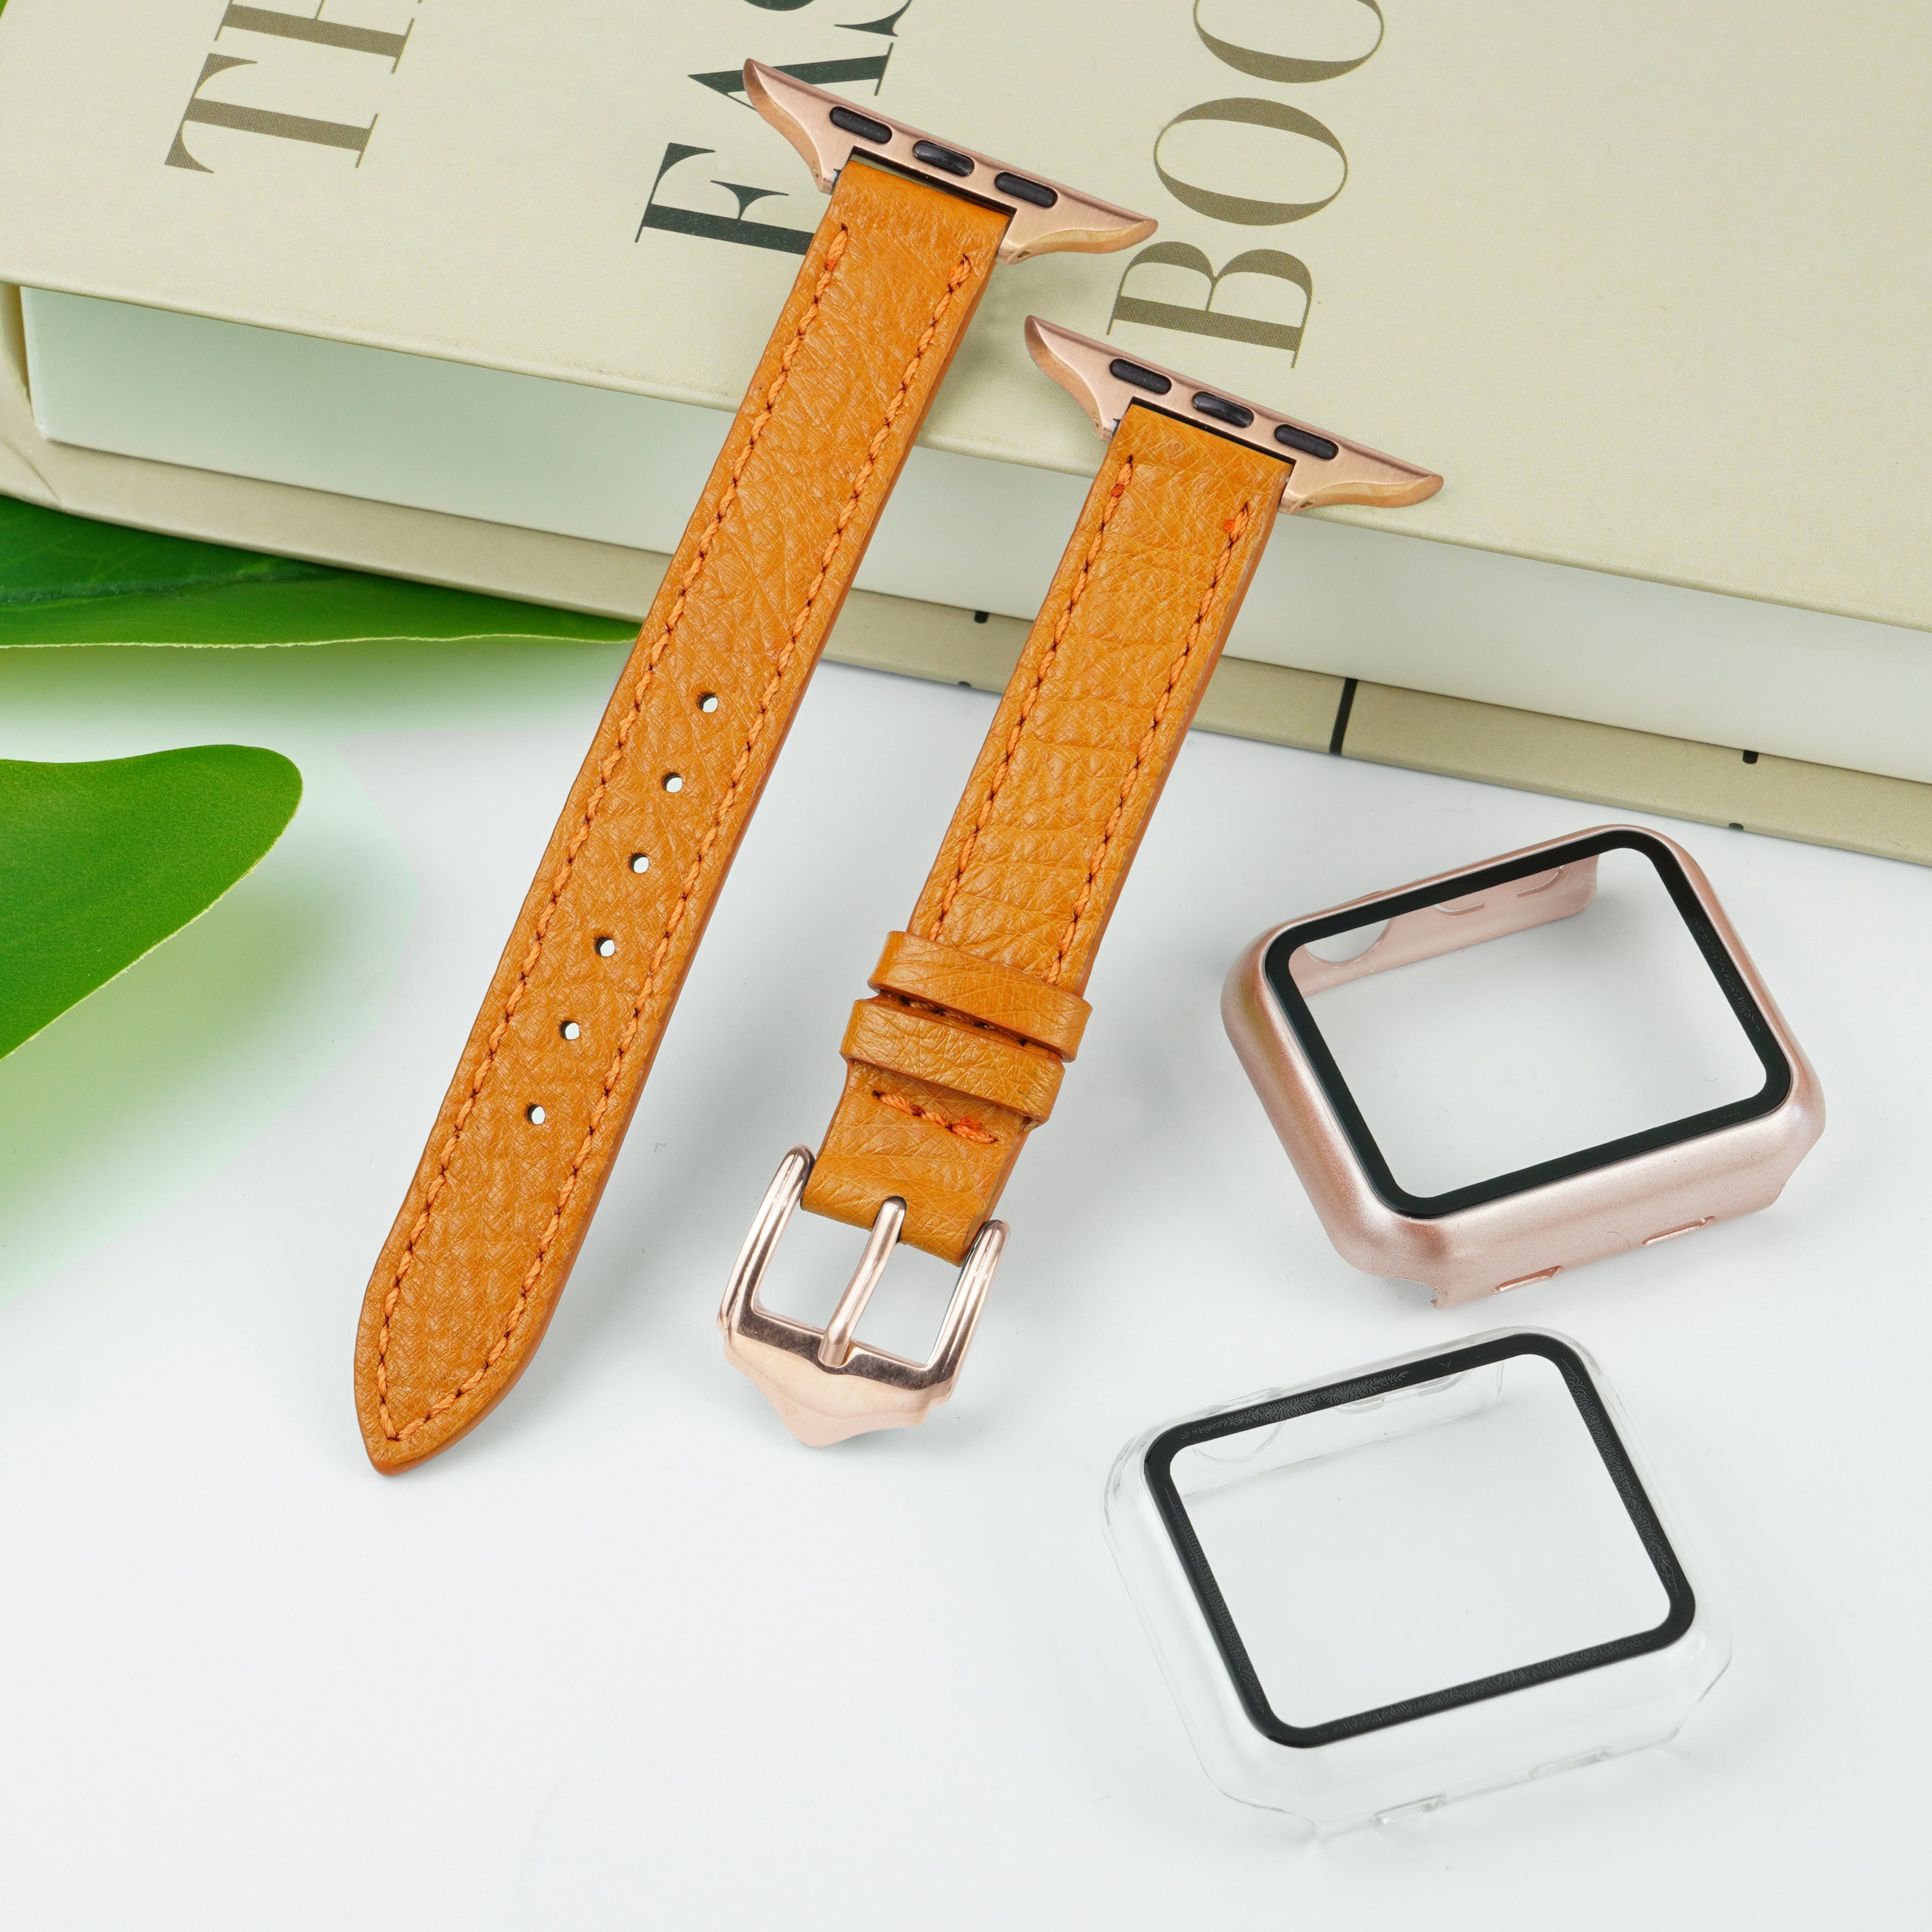 Tan Flat Ostrich Leather Band Compatible Apple Watch Iwatch 40mm Screen Protector Case Gold Adapter Replacement Strap For Smartwatch Series 4 5 6 SE Leather Handmade AW-182G-W-40MM